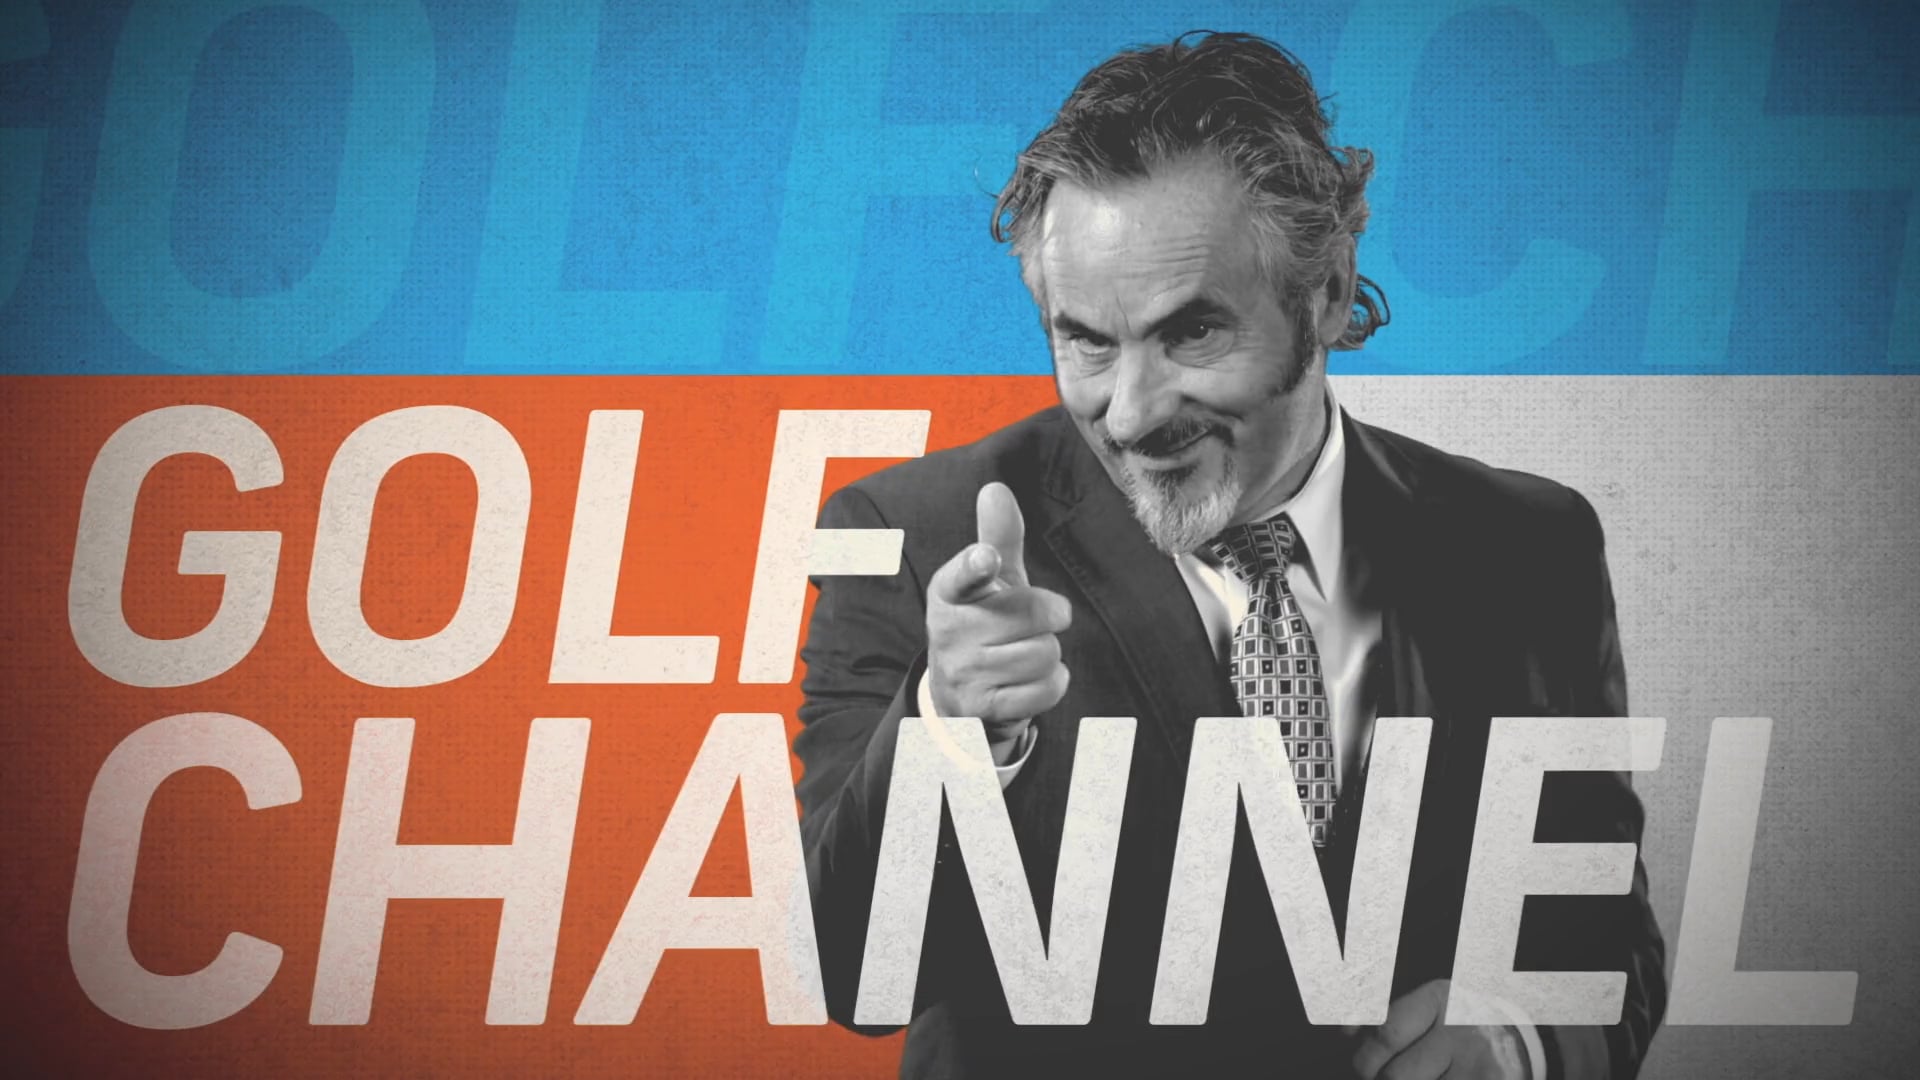 The Feherty Show